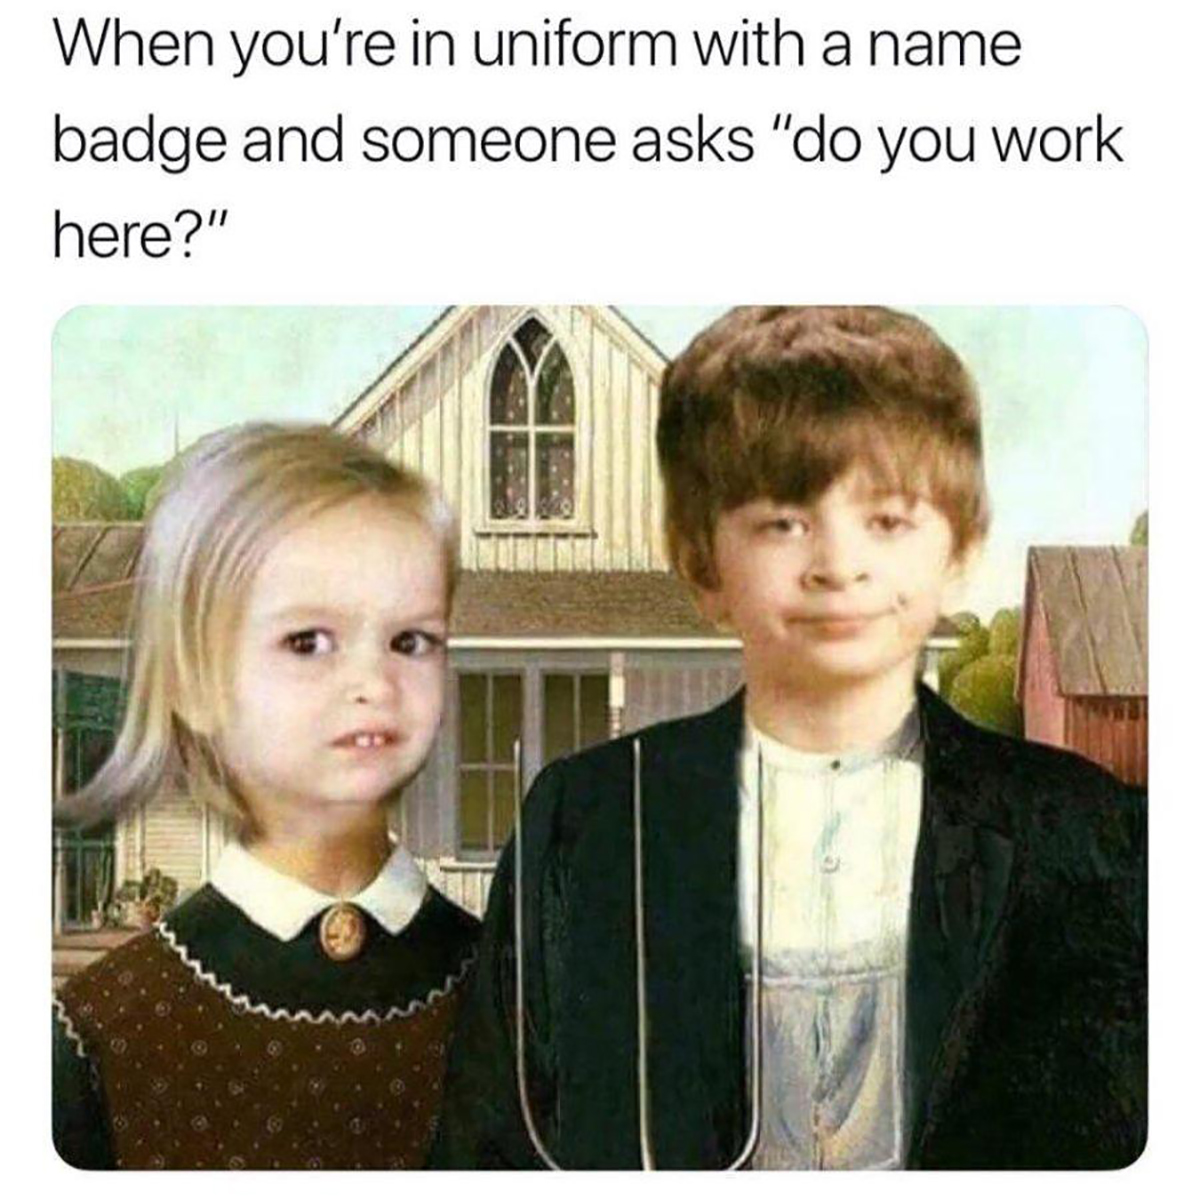 fresh memes - american gothic meme - When you're in uniform with a name badge and someone asks